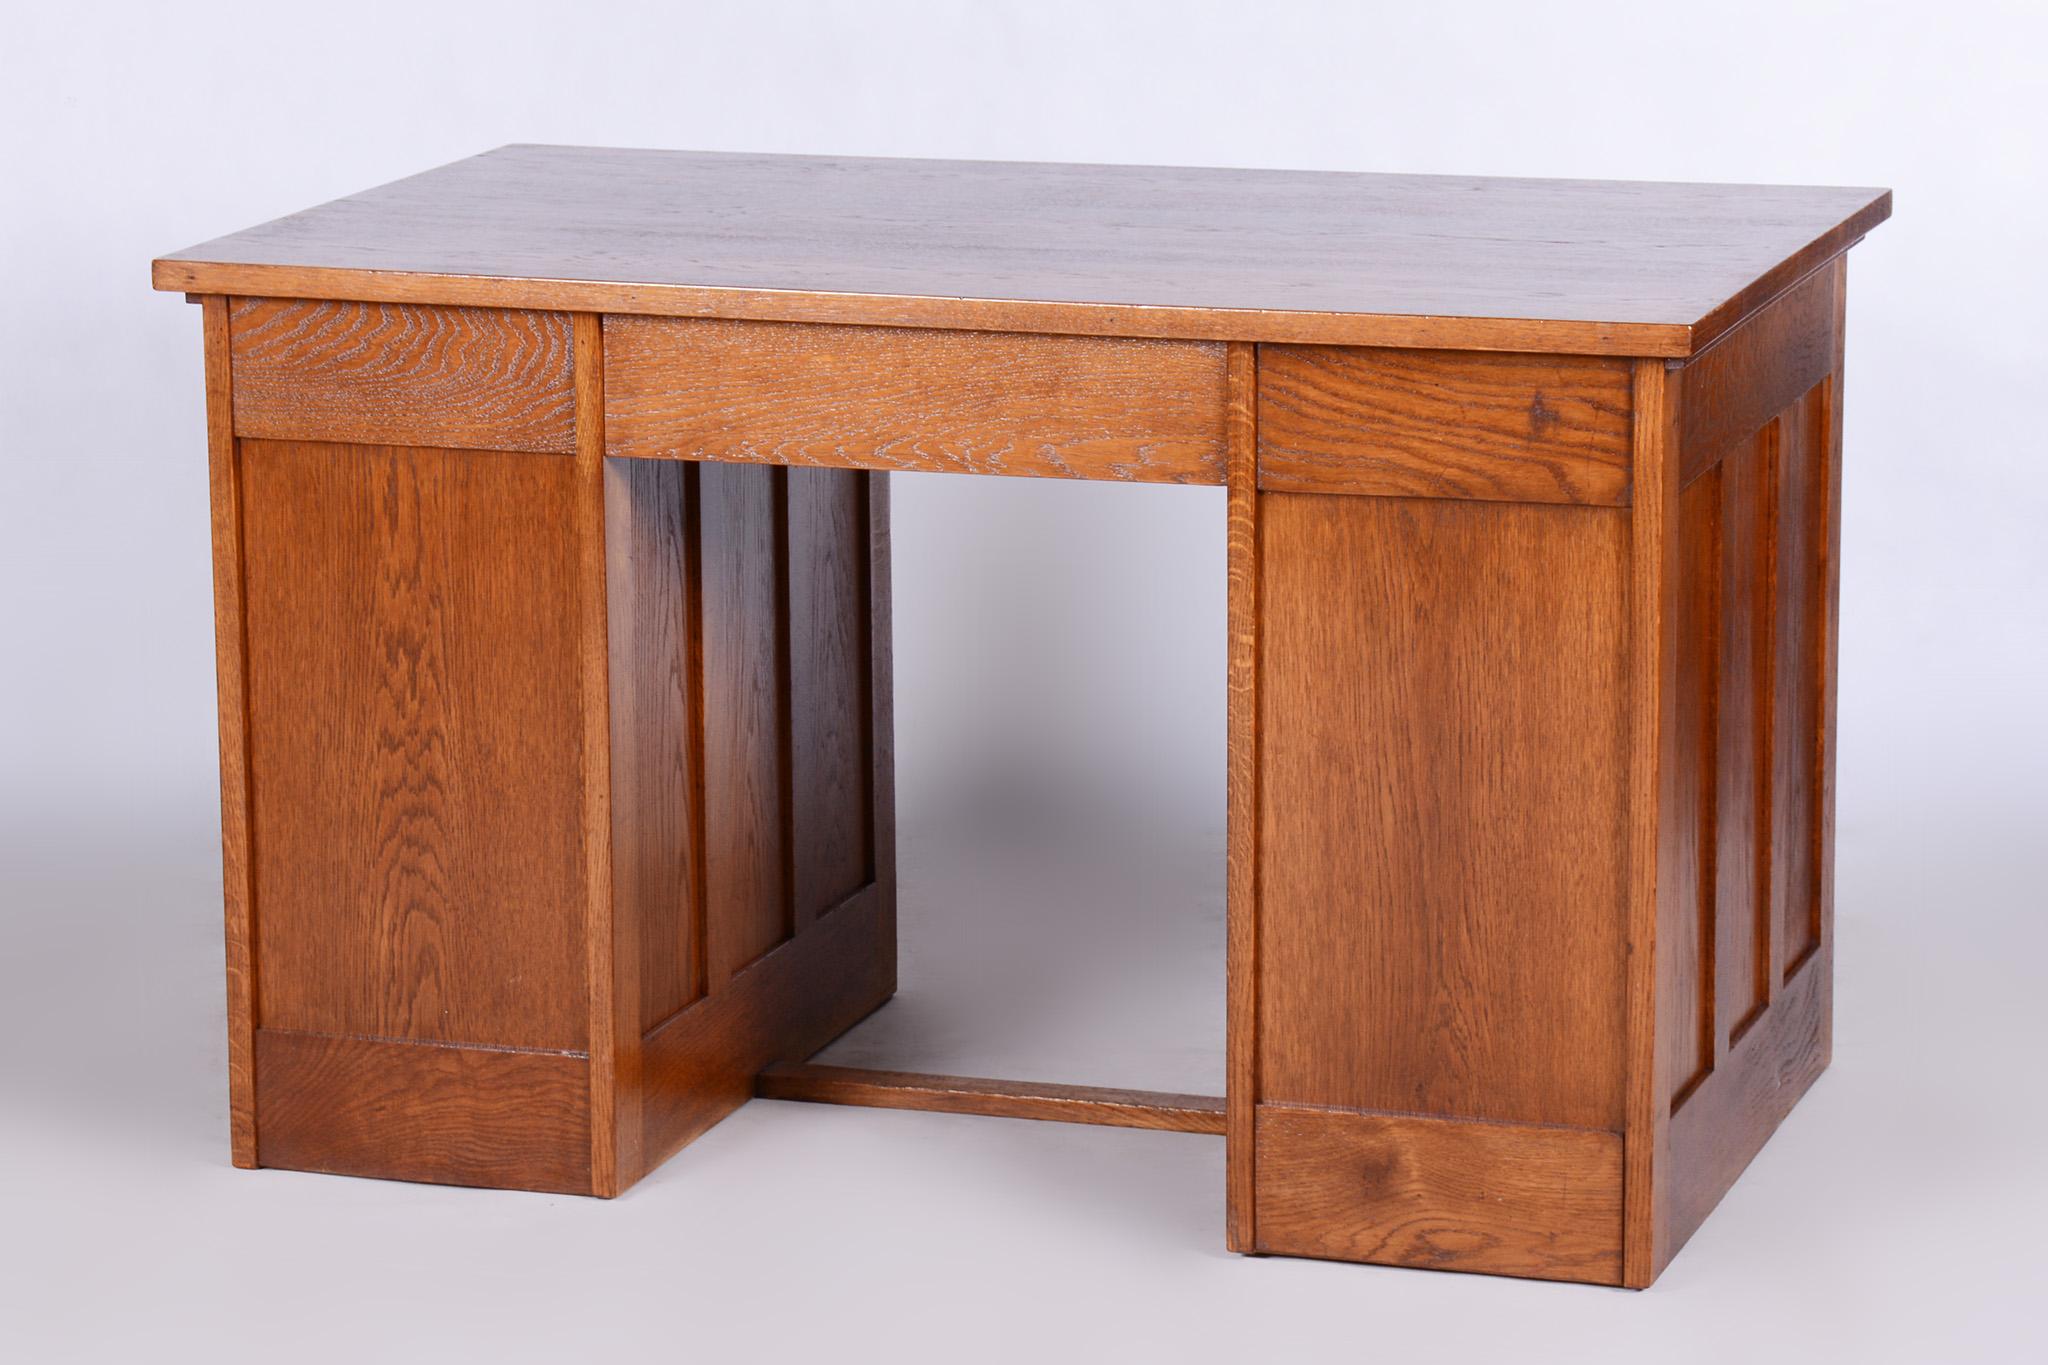 Restored Art Deco Solid Oak Writing Desk Made in the 1930s, Czechia For Sale 3